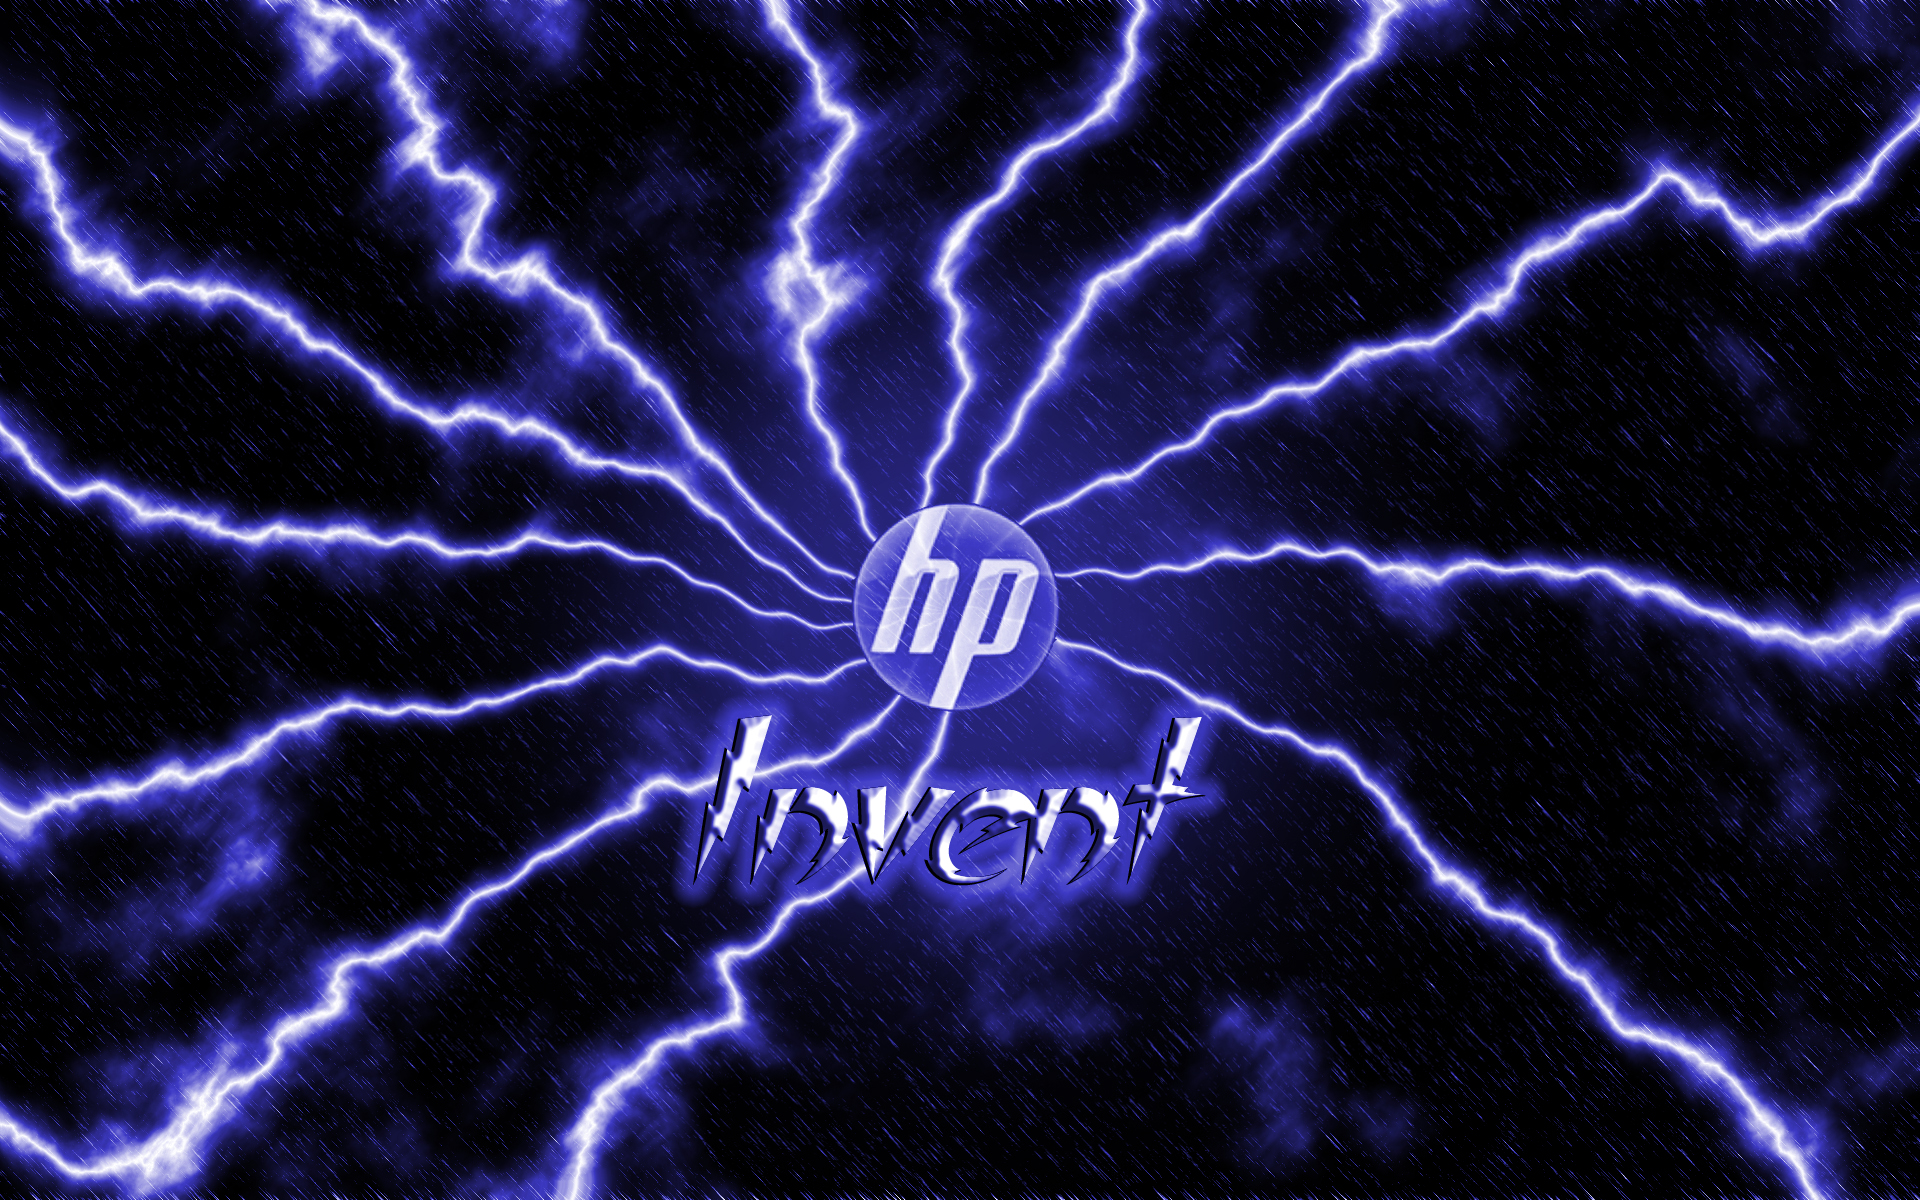 HP invent wallpaper by